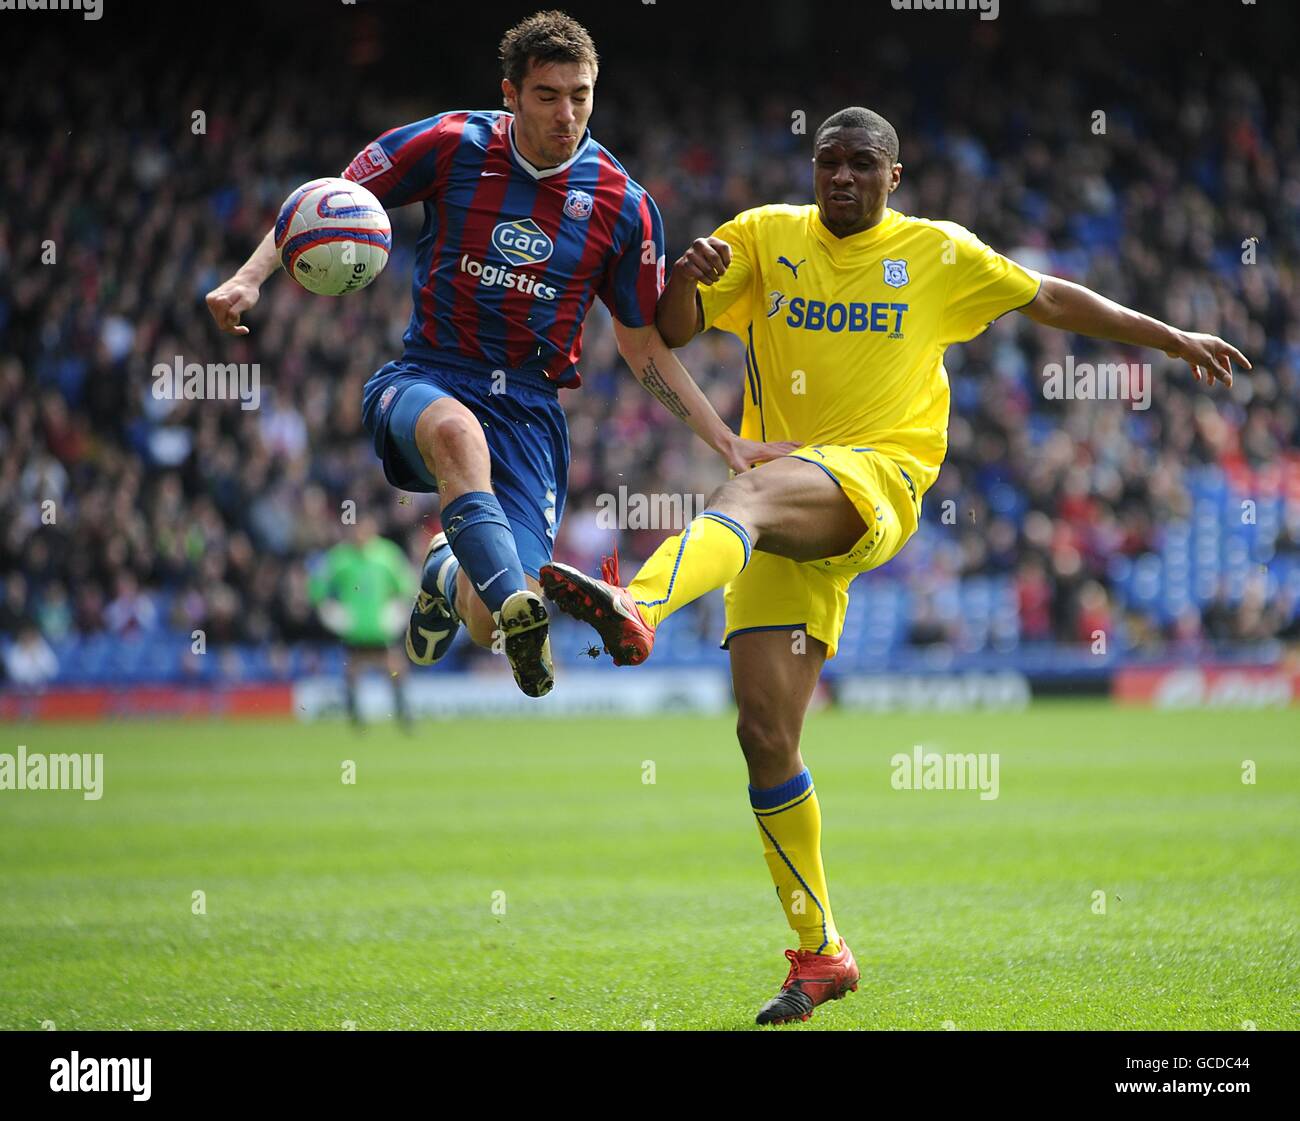 Soccer - Coca-Cola Football League Championship - Crystal Palace v Cardiff City - Selhurst Park. Crystal Palace's Darren Ambrose (left) and Cardiff City's Kelvin Etuhu battle for the ball Stock Photo